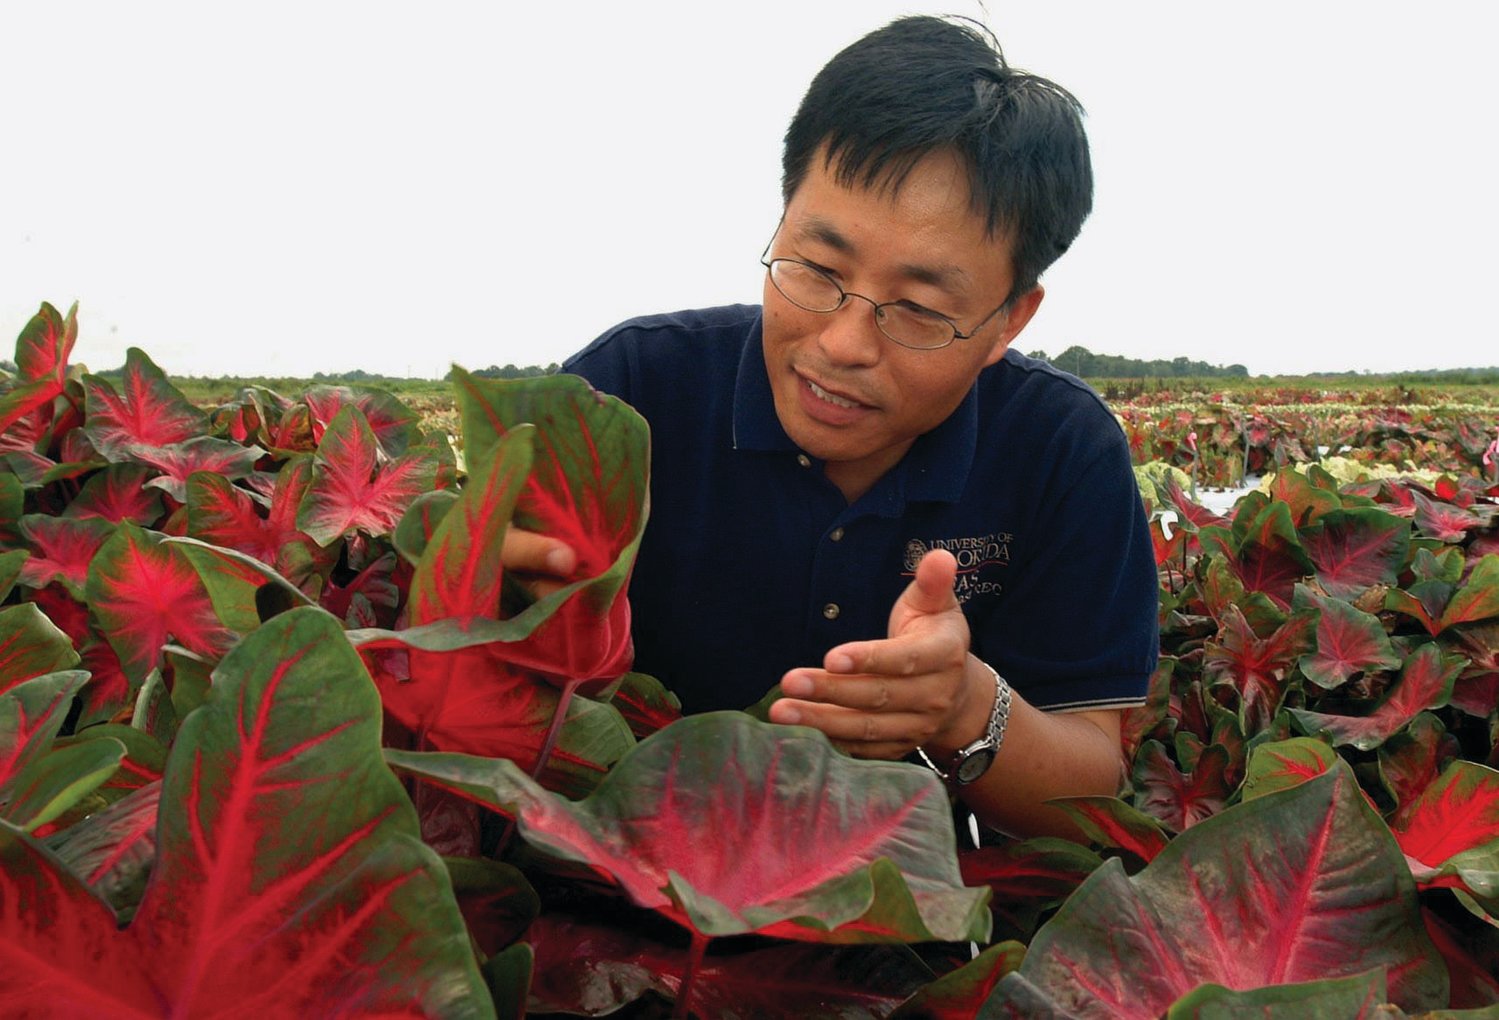 As a UF/IFAS plant breeder, Zhanao Deng works to improve many ornamentals from his lab and fields at the Gulf Coast Research and Education Center in Balm. NOTE: Plants in photo are not impatiens.